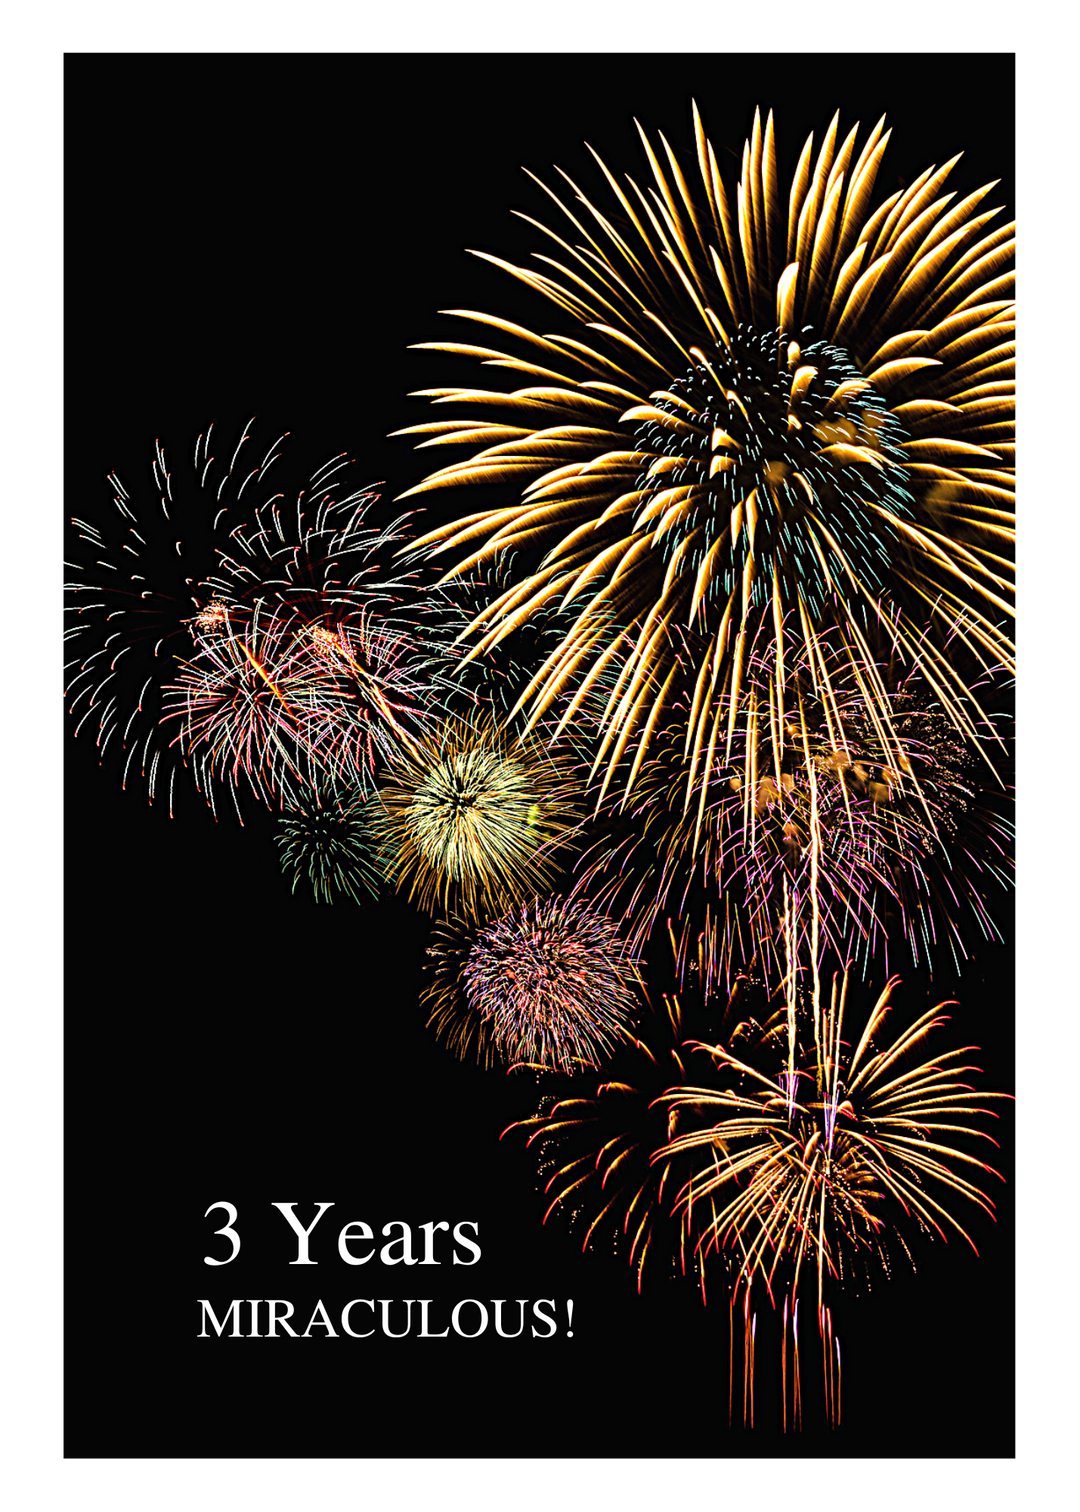 05. Fireworks Card (90 Days, 1-50 Years). A07